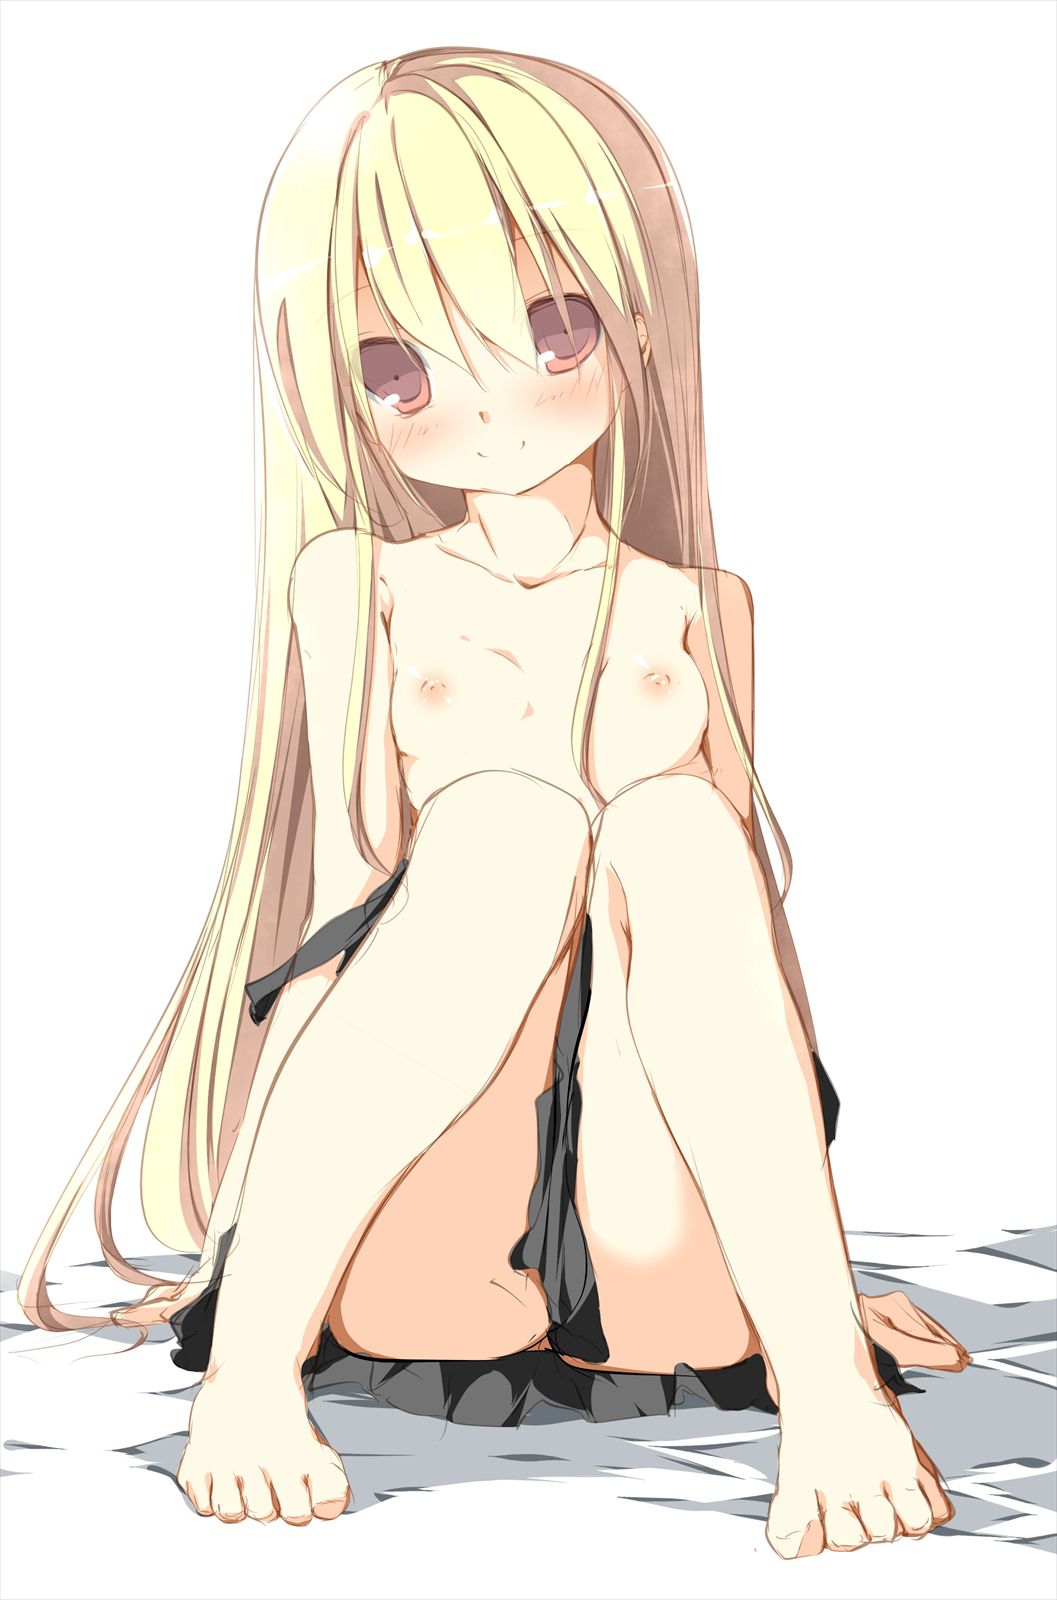 two-dimensional erotic image of a small small loli girl who loves everyone 19